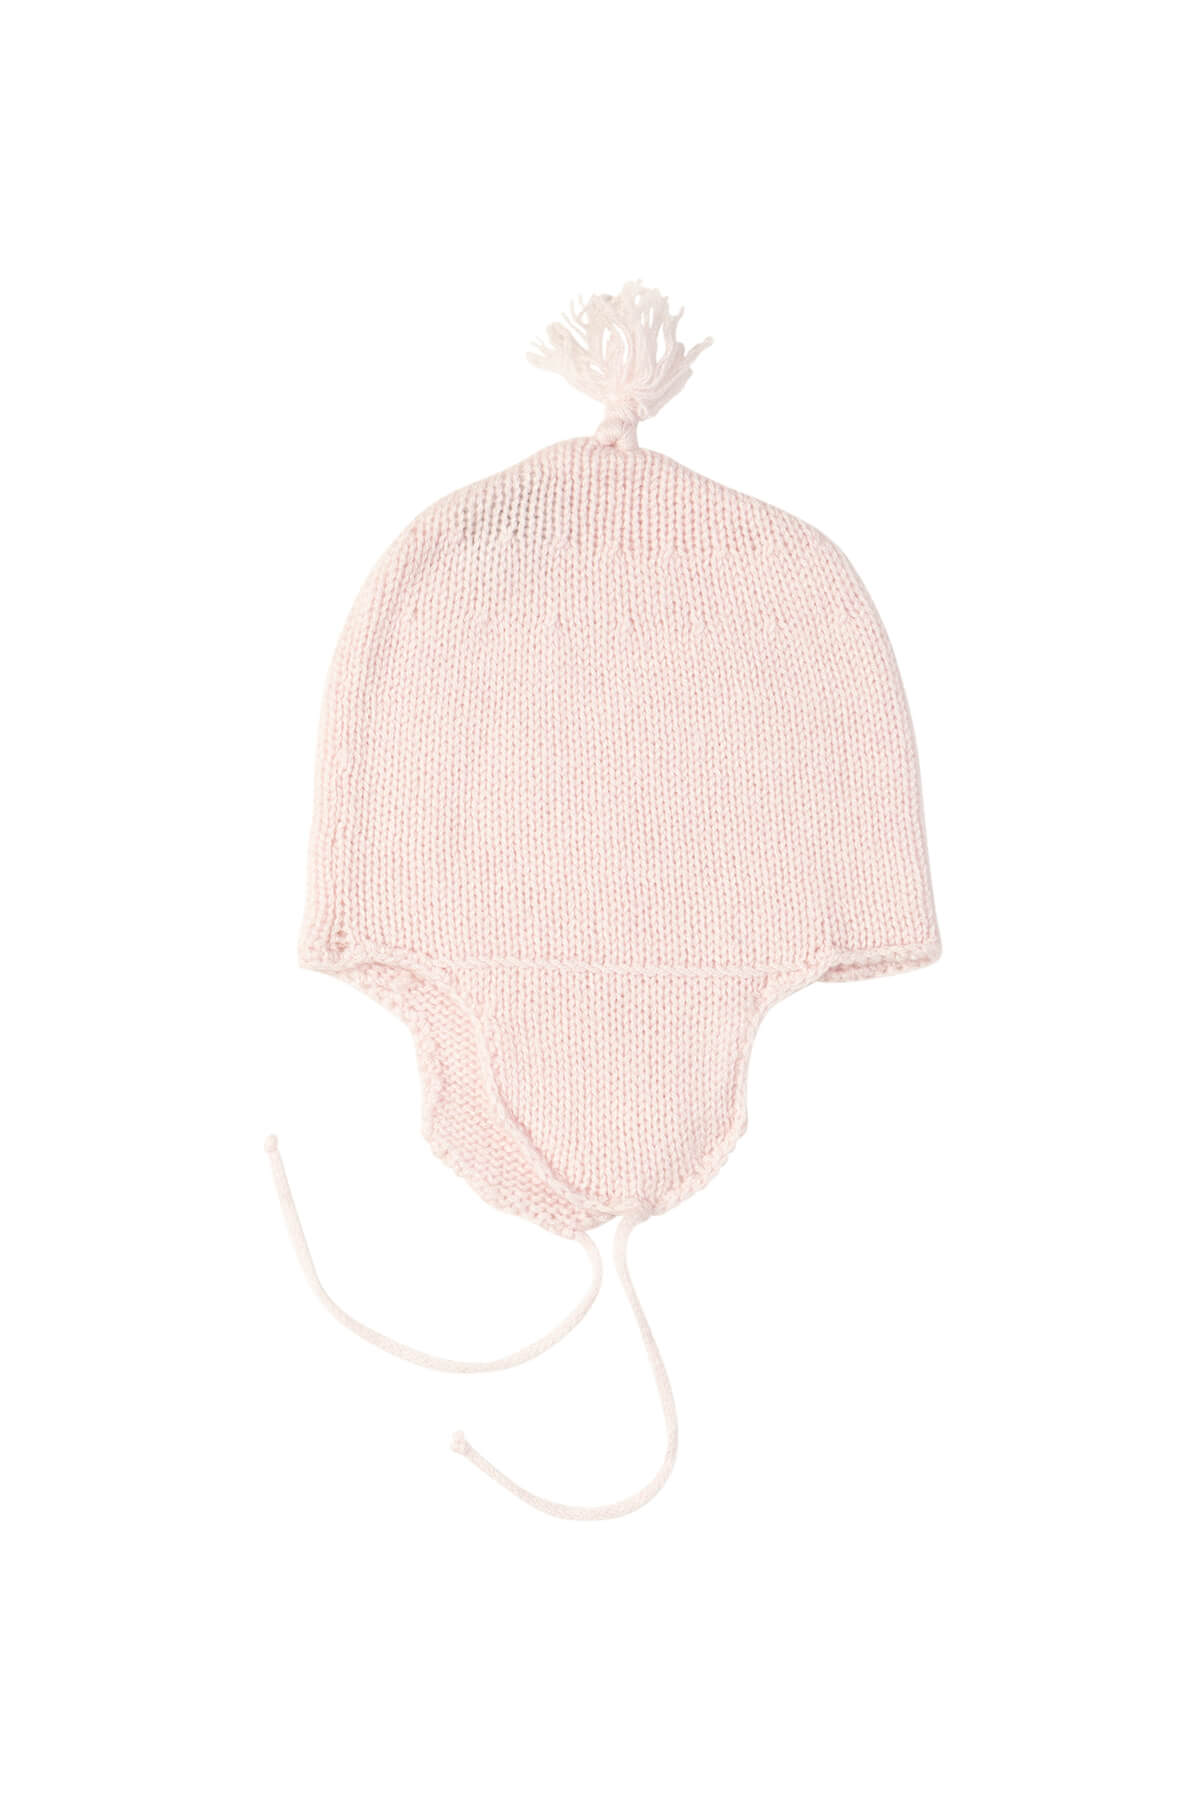  Johnstons of Elgin’s Baby's 1st Cashmere Baby Hat in Blush Pink on a white background AW21GIFTSET19B